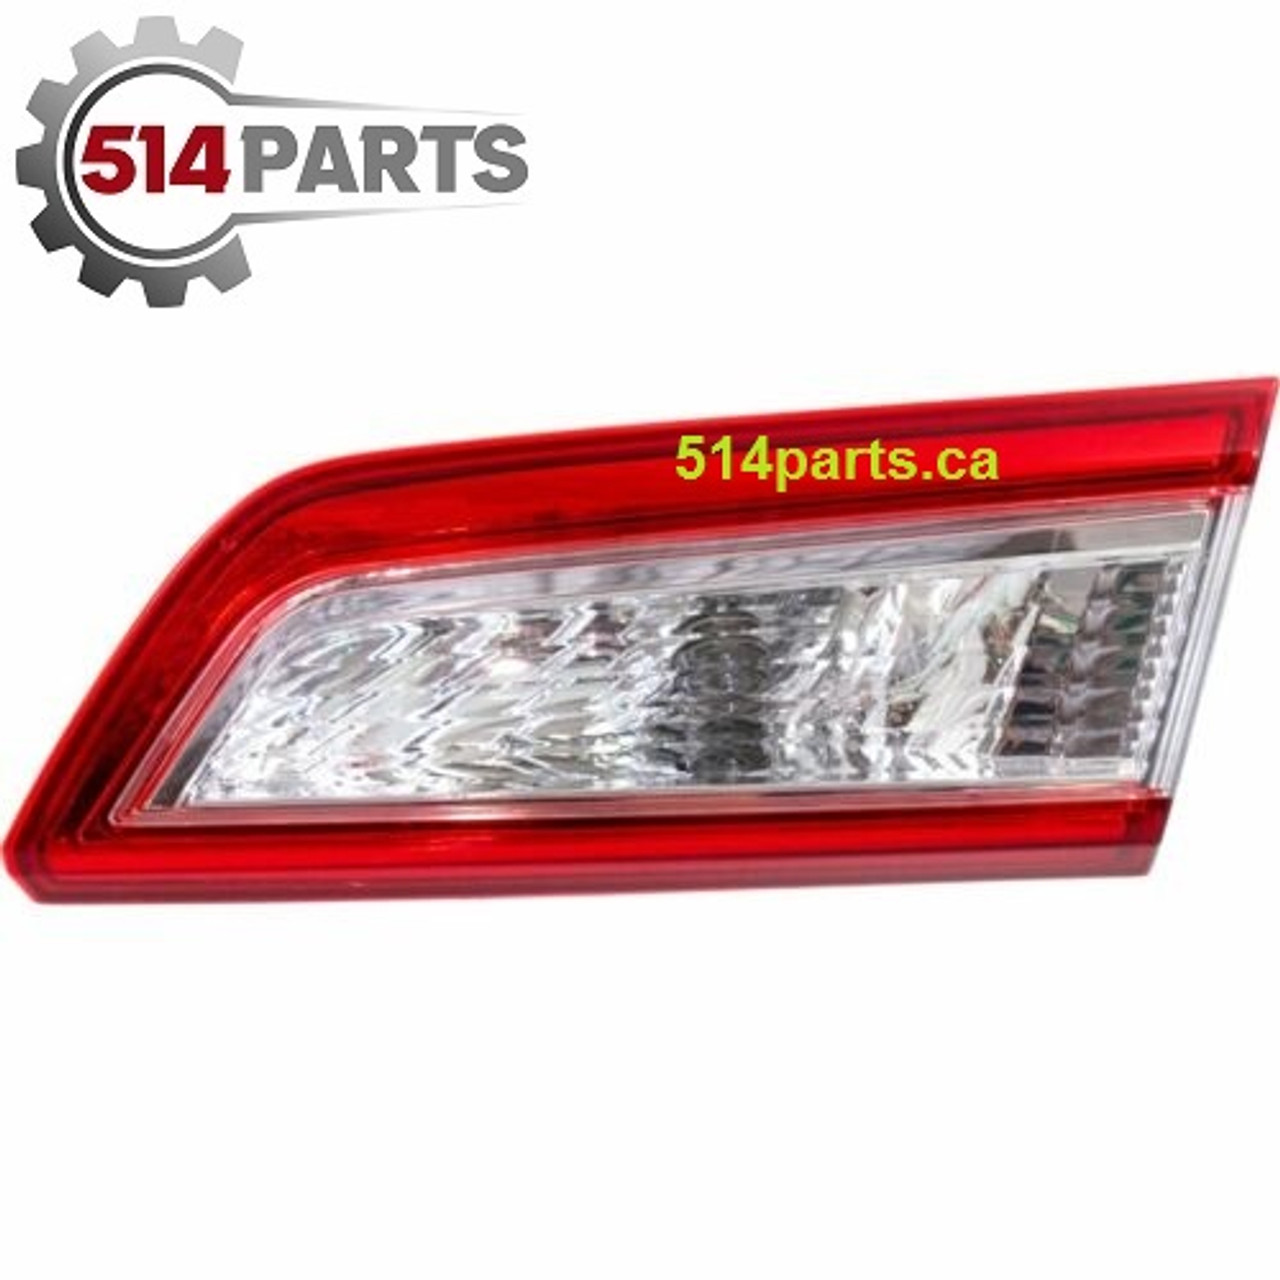 2012 - 2014 TOYOTA CAMRY and CAMRY HYBRID Inner TAIL LIGHTS(BACK-UP LAMP) High Quality - PHARES ARRIERE Interne(LAMPE DE RECUL) Haute Qualite